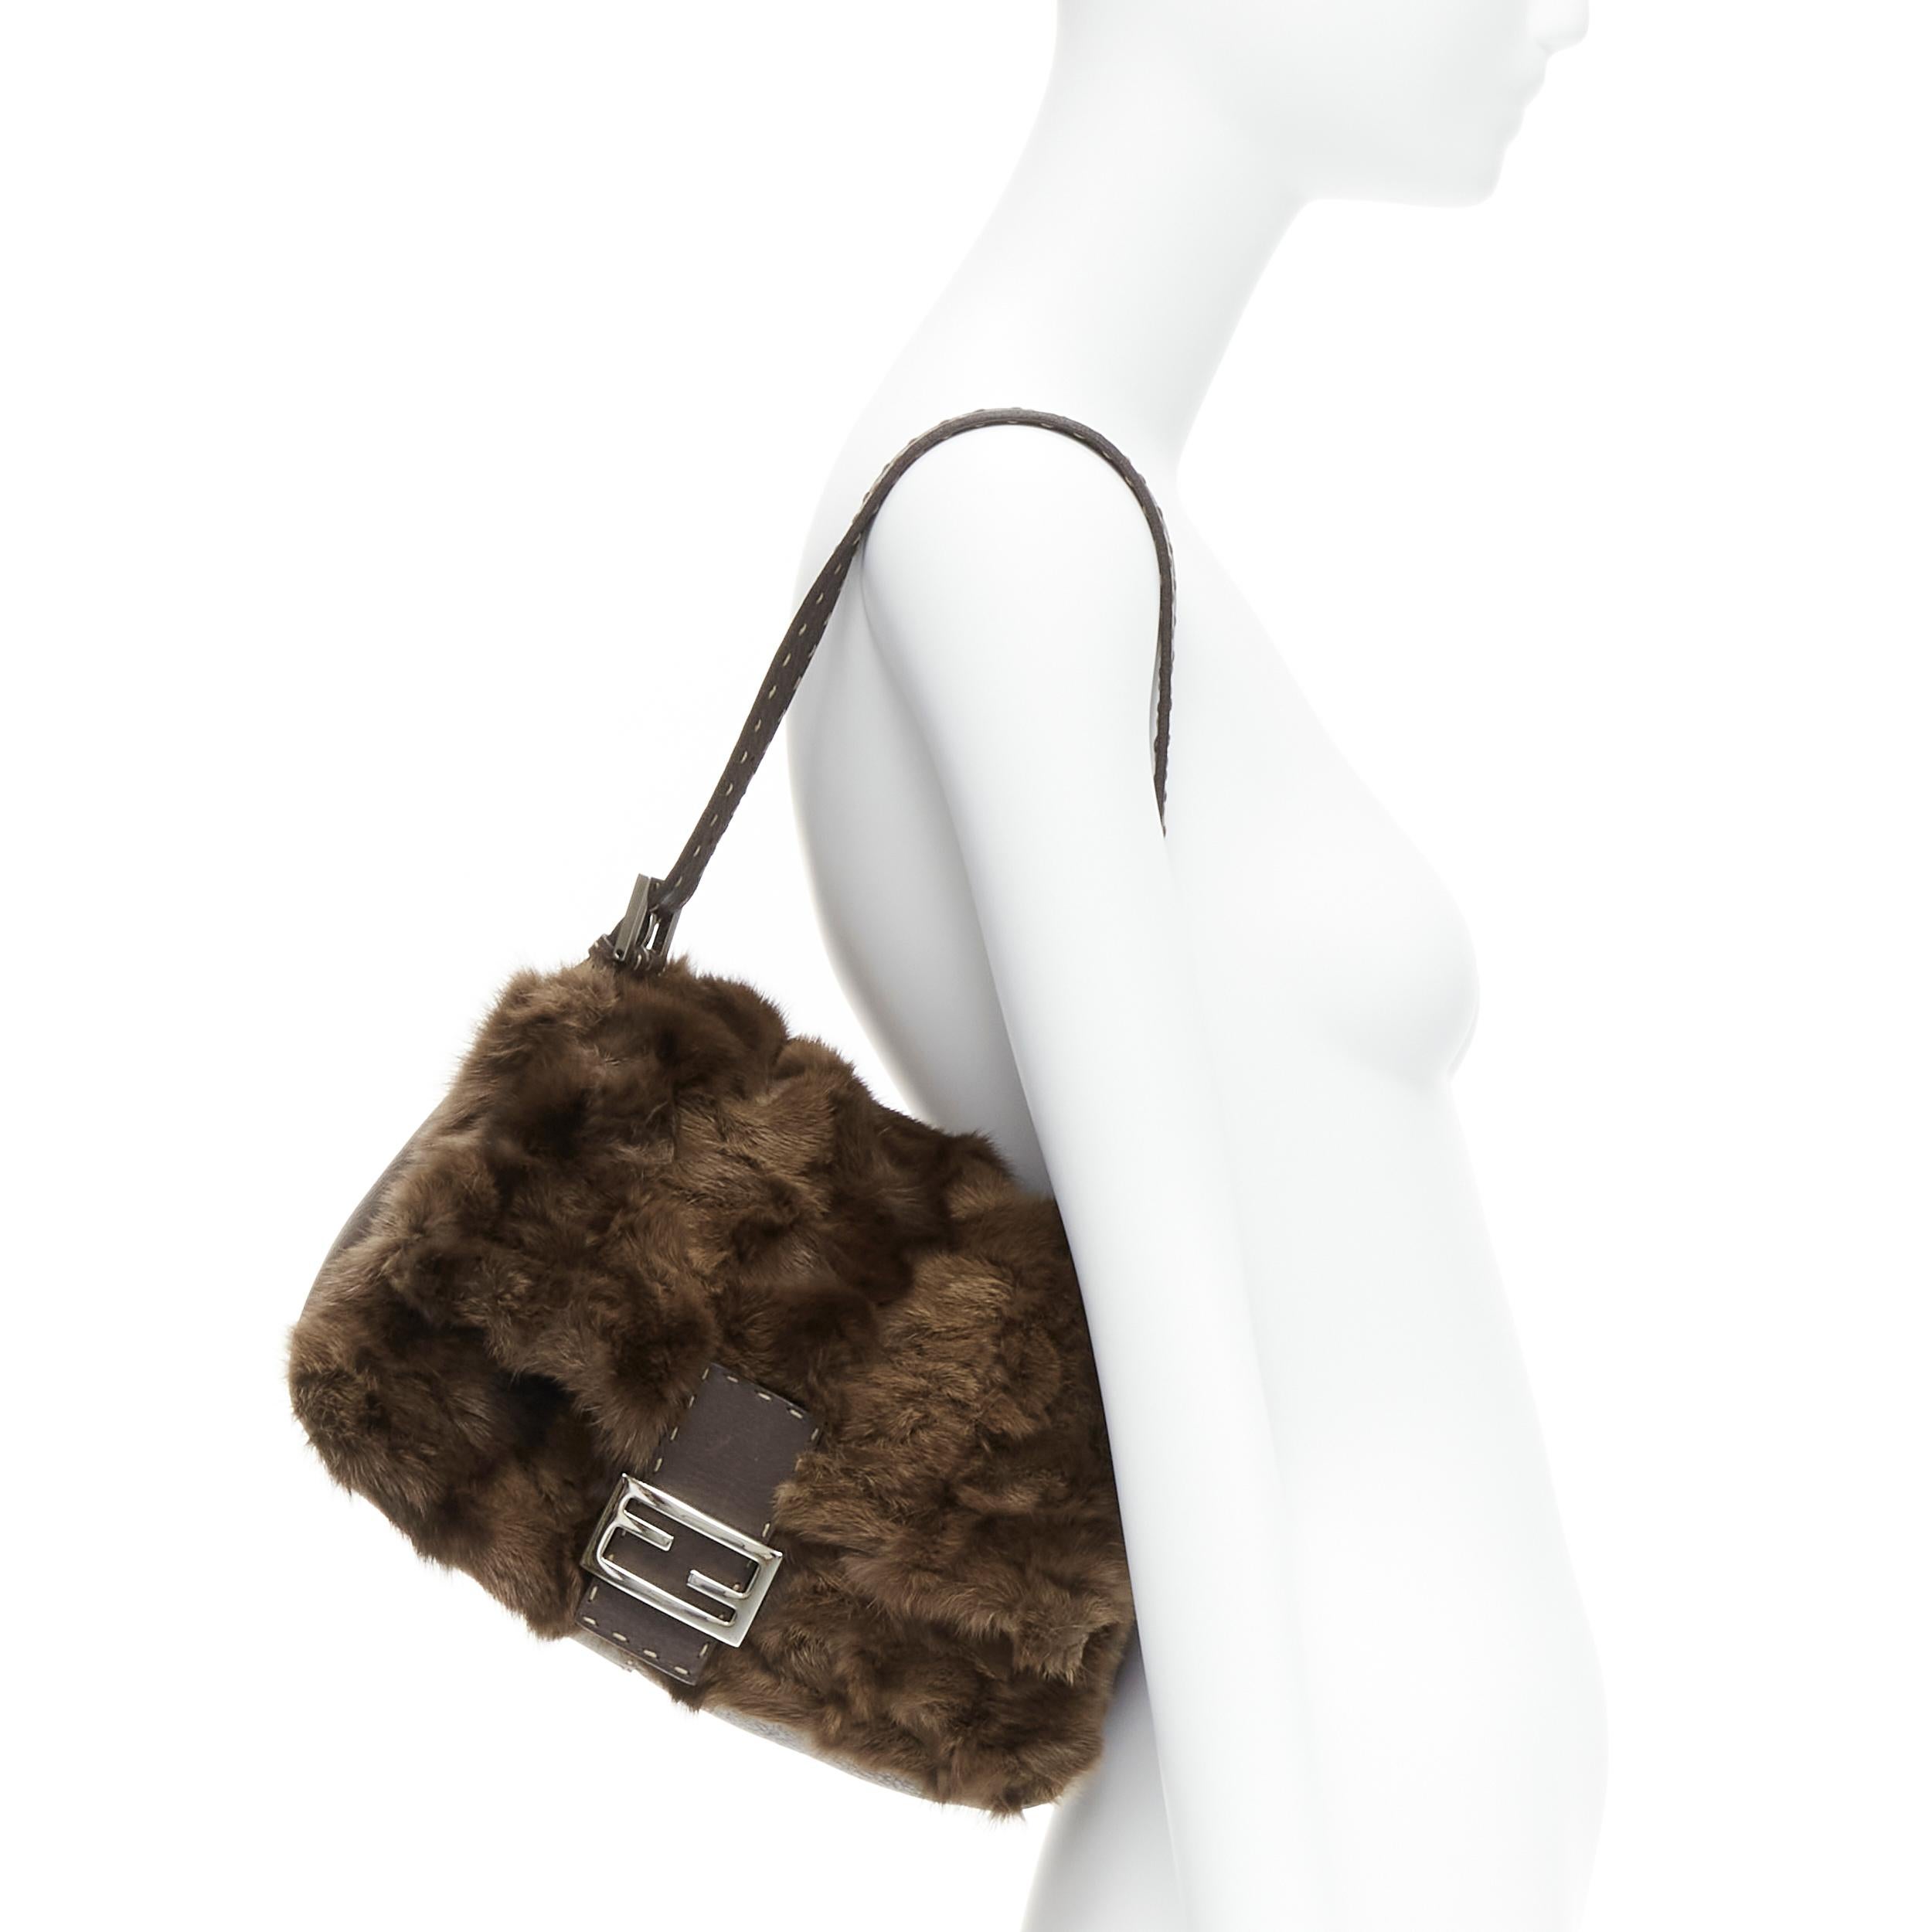 FENDI Selleria Mamma Baguette FF buckle brown rabbit fur underarm bag
Reference: TGAS/C01865
Brand: Fendi
Collection: Selleria 1925
Material: Fur, Leather
Color: Brown
Pattern: Solid
Closure: Snap Buttons
Lining: Beige Leather
Extra Details: